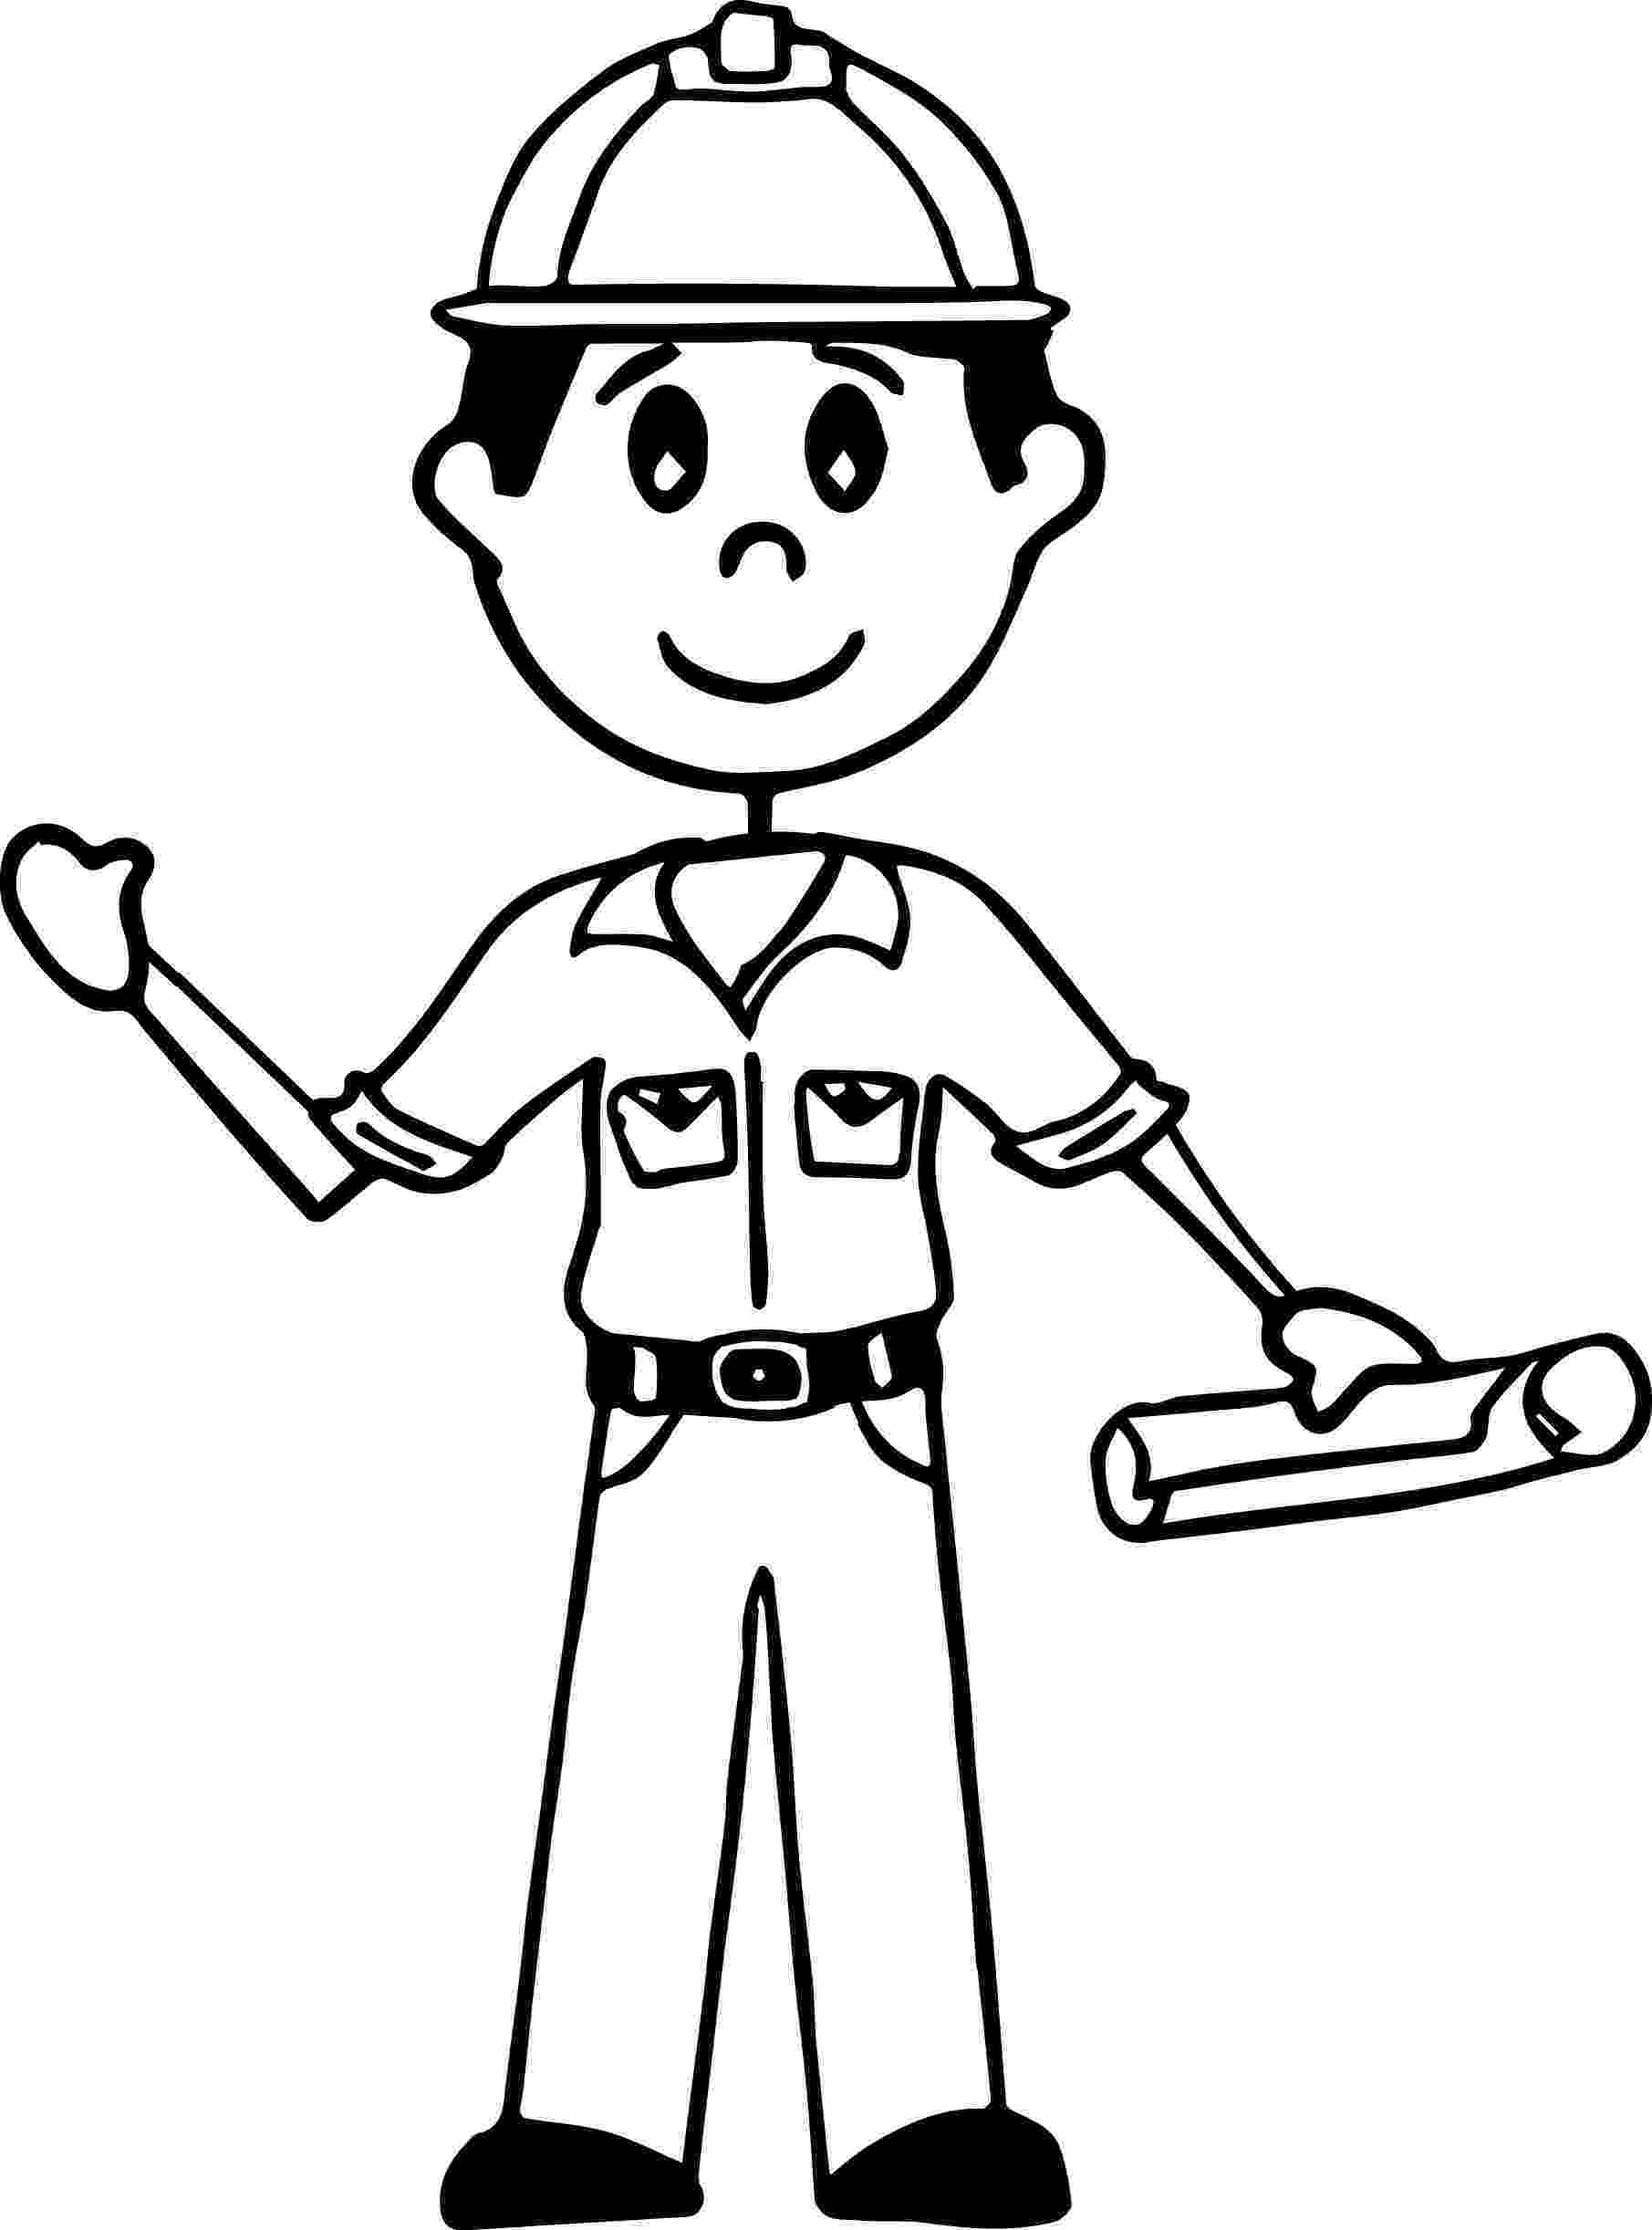 man coloring page wrist watch coloring pages coloring pages coloring page man 